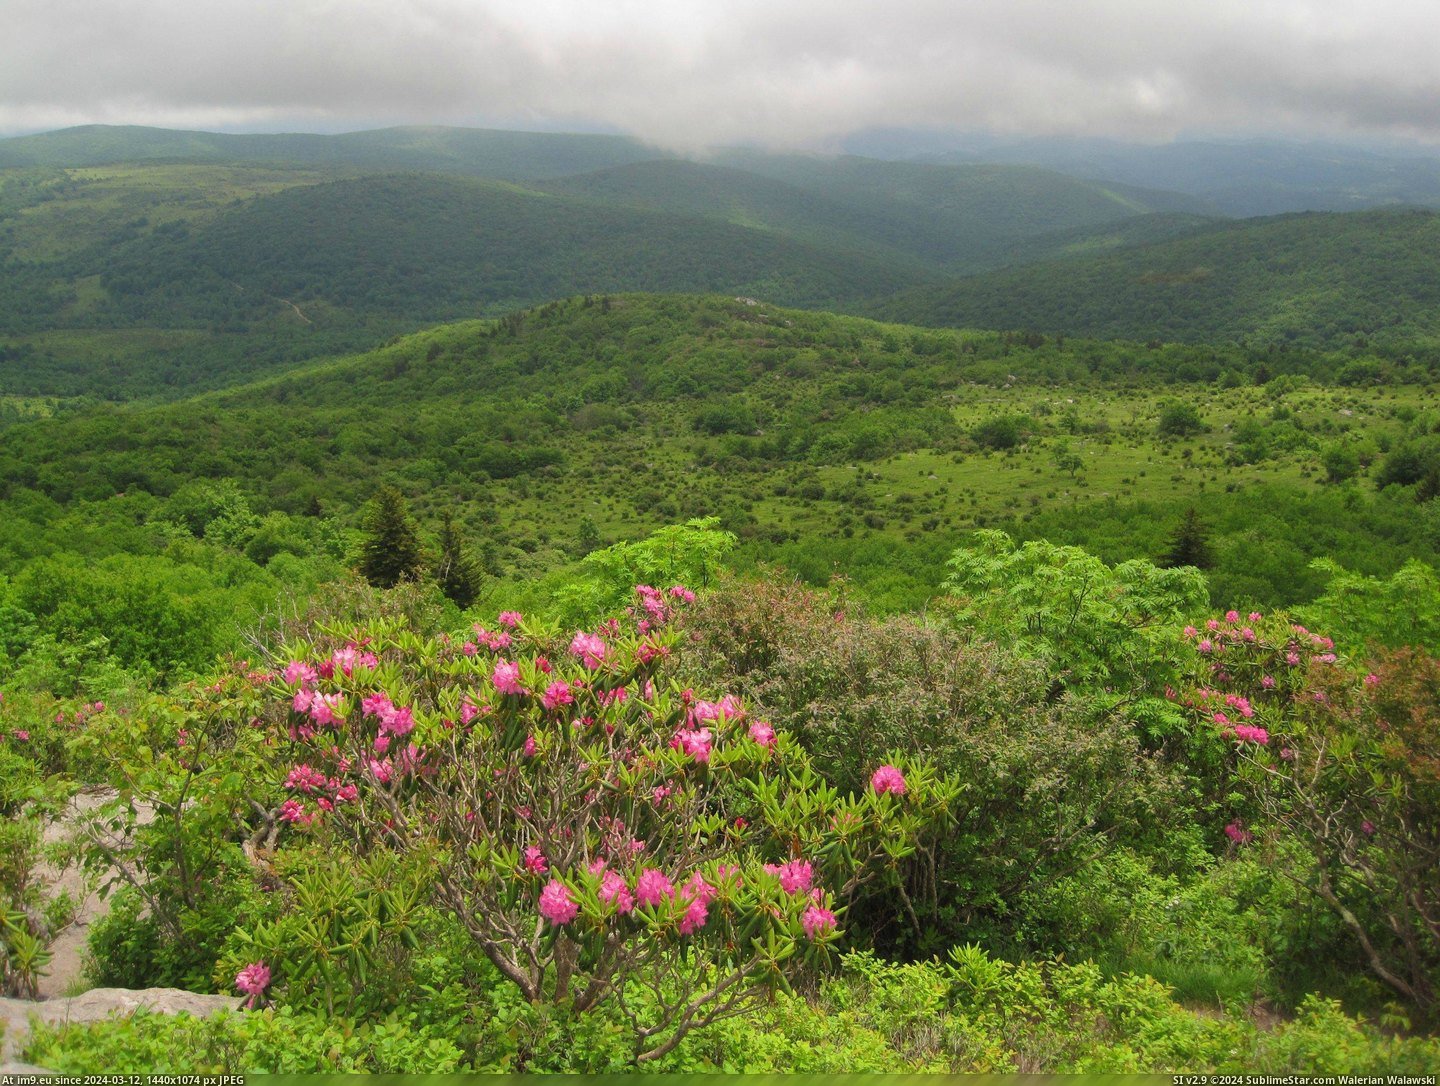 #Mount #Peak #3648x2736 #Rogers #Rhododendrons #Highest #Virginia [Earthporn] Rhododendrons as seen From an Ascent on Mount Rogers; the Highest Peak in Virginia.  [3648X2736] Pic. (Image of album My r/EARTHPORN favs))